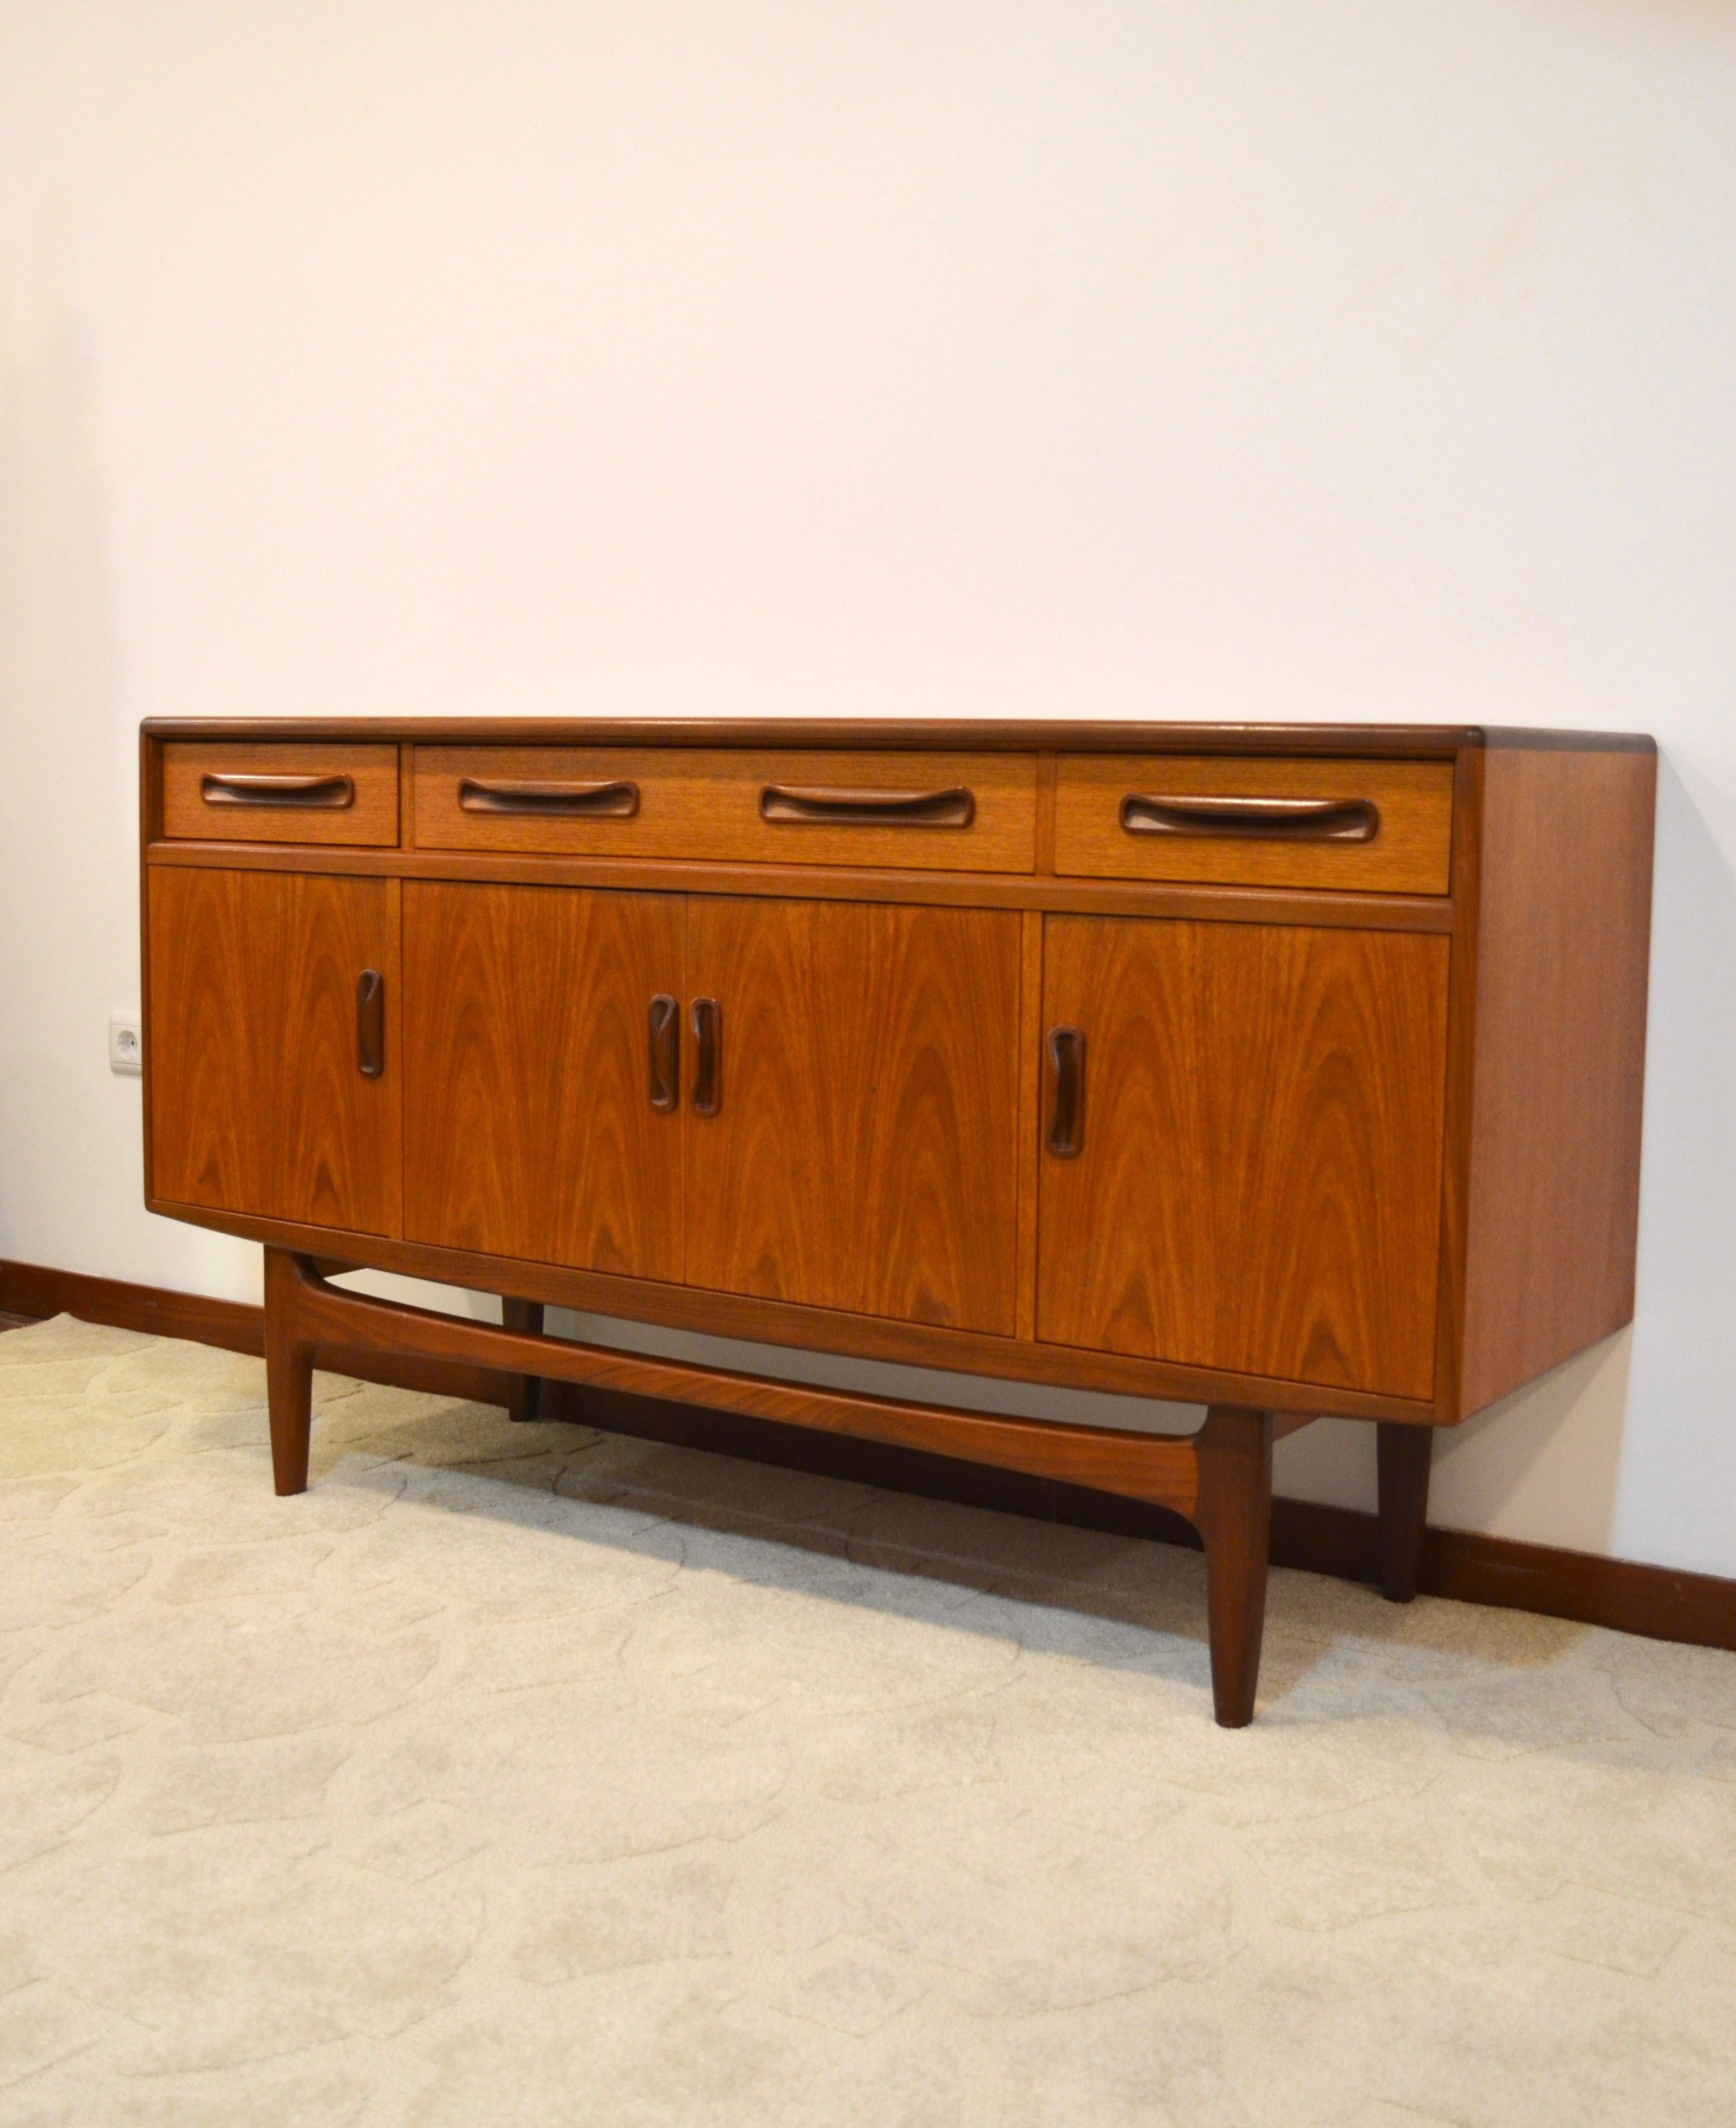 Teak sideboard by V. Wilkins for G-Plan, “Fresco” collection, England, 1966

Elegant sideboard with nice proportions.
It has a very good storage capacity with two small spaces on either side and a central space, all equipped with a shelf. It also